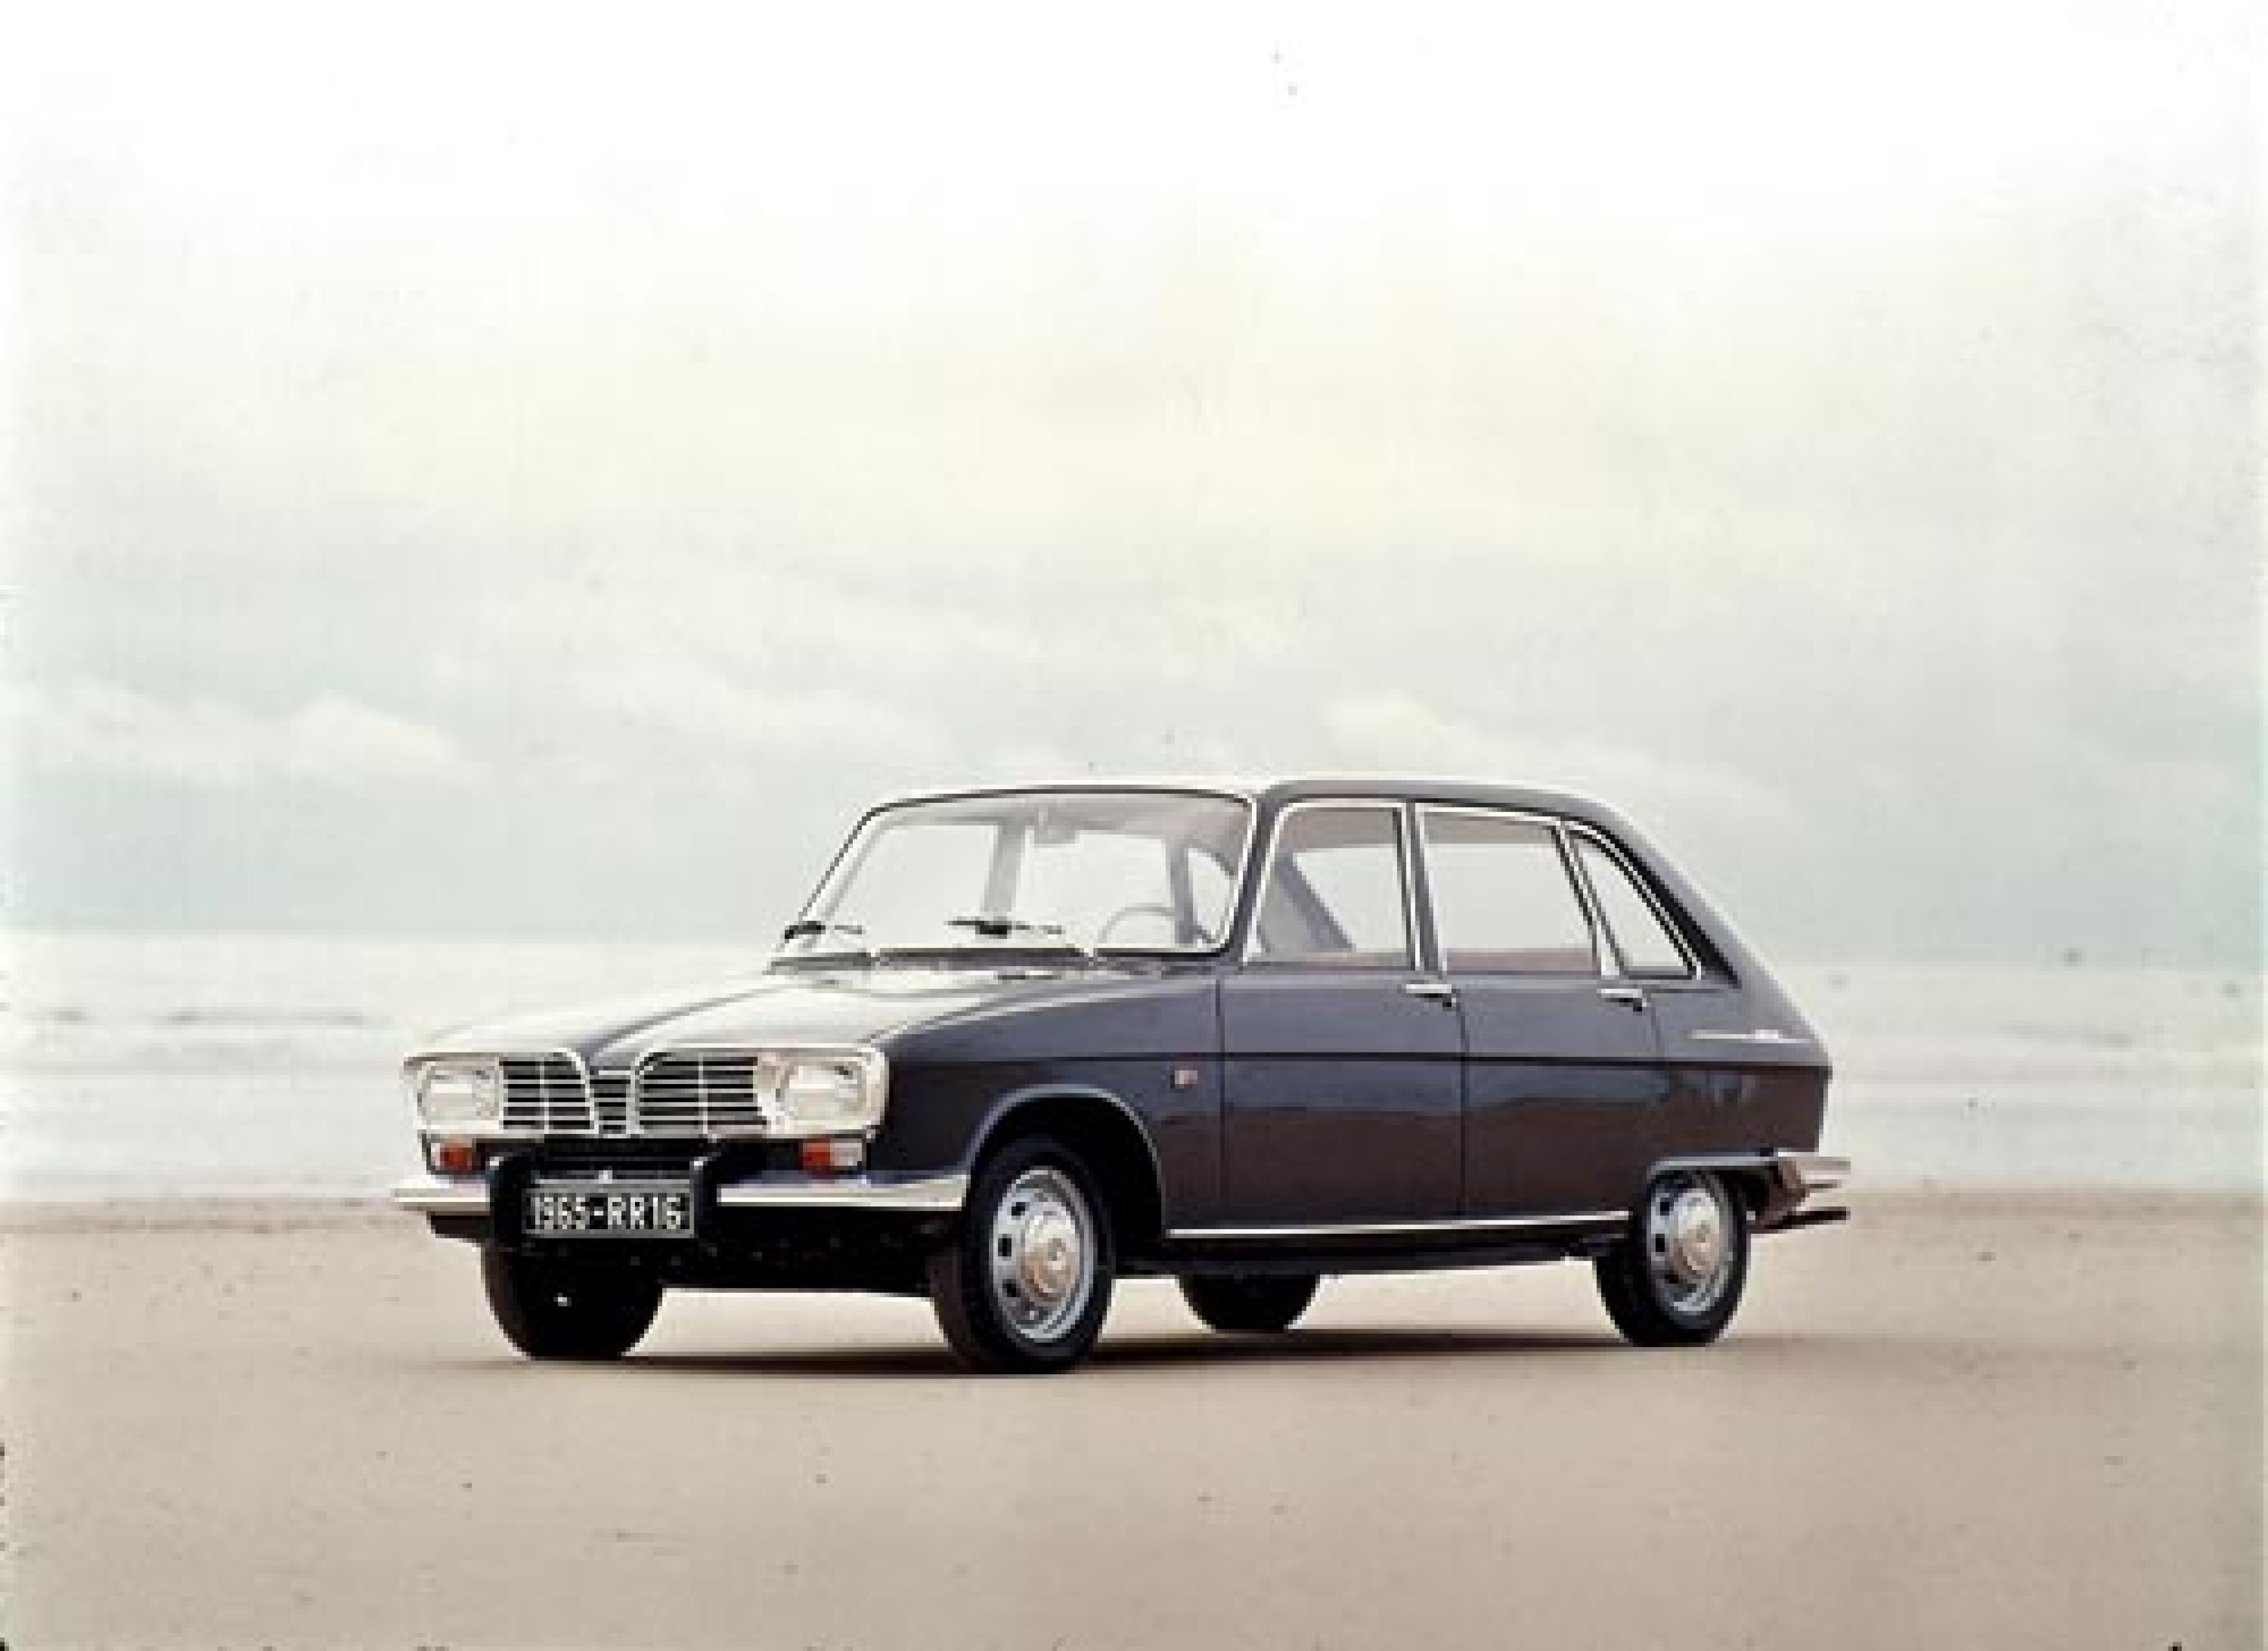 87a20f62/renault 16 ts front jpg